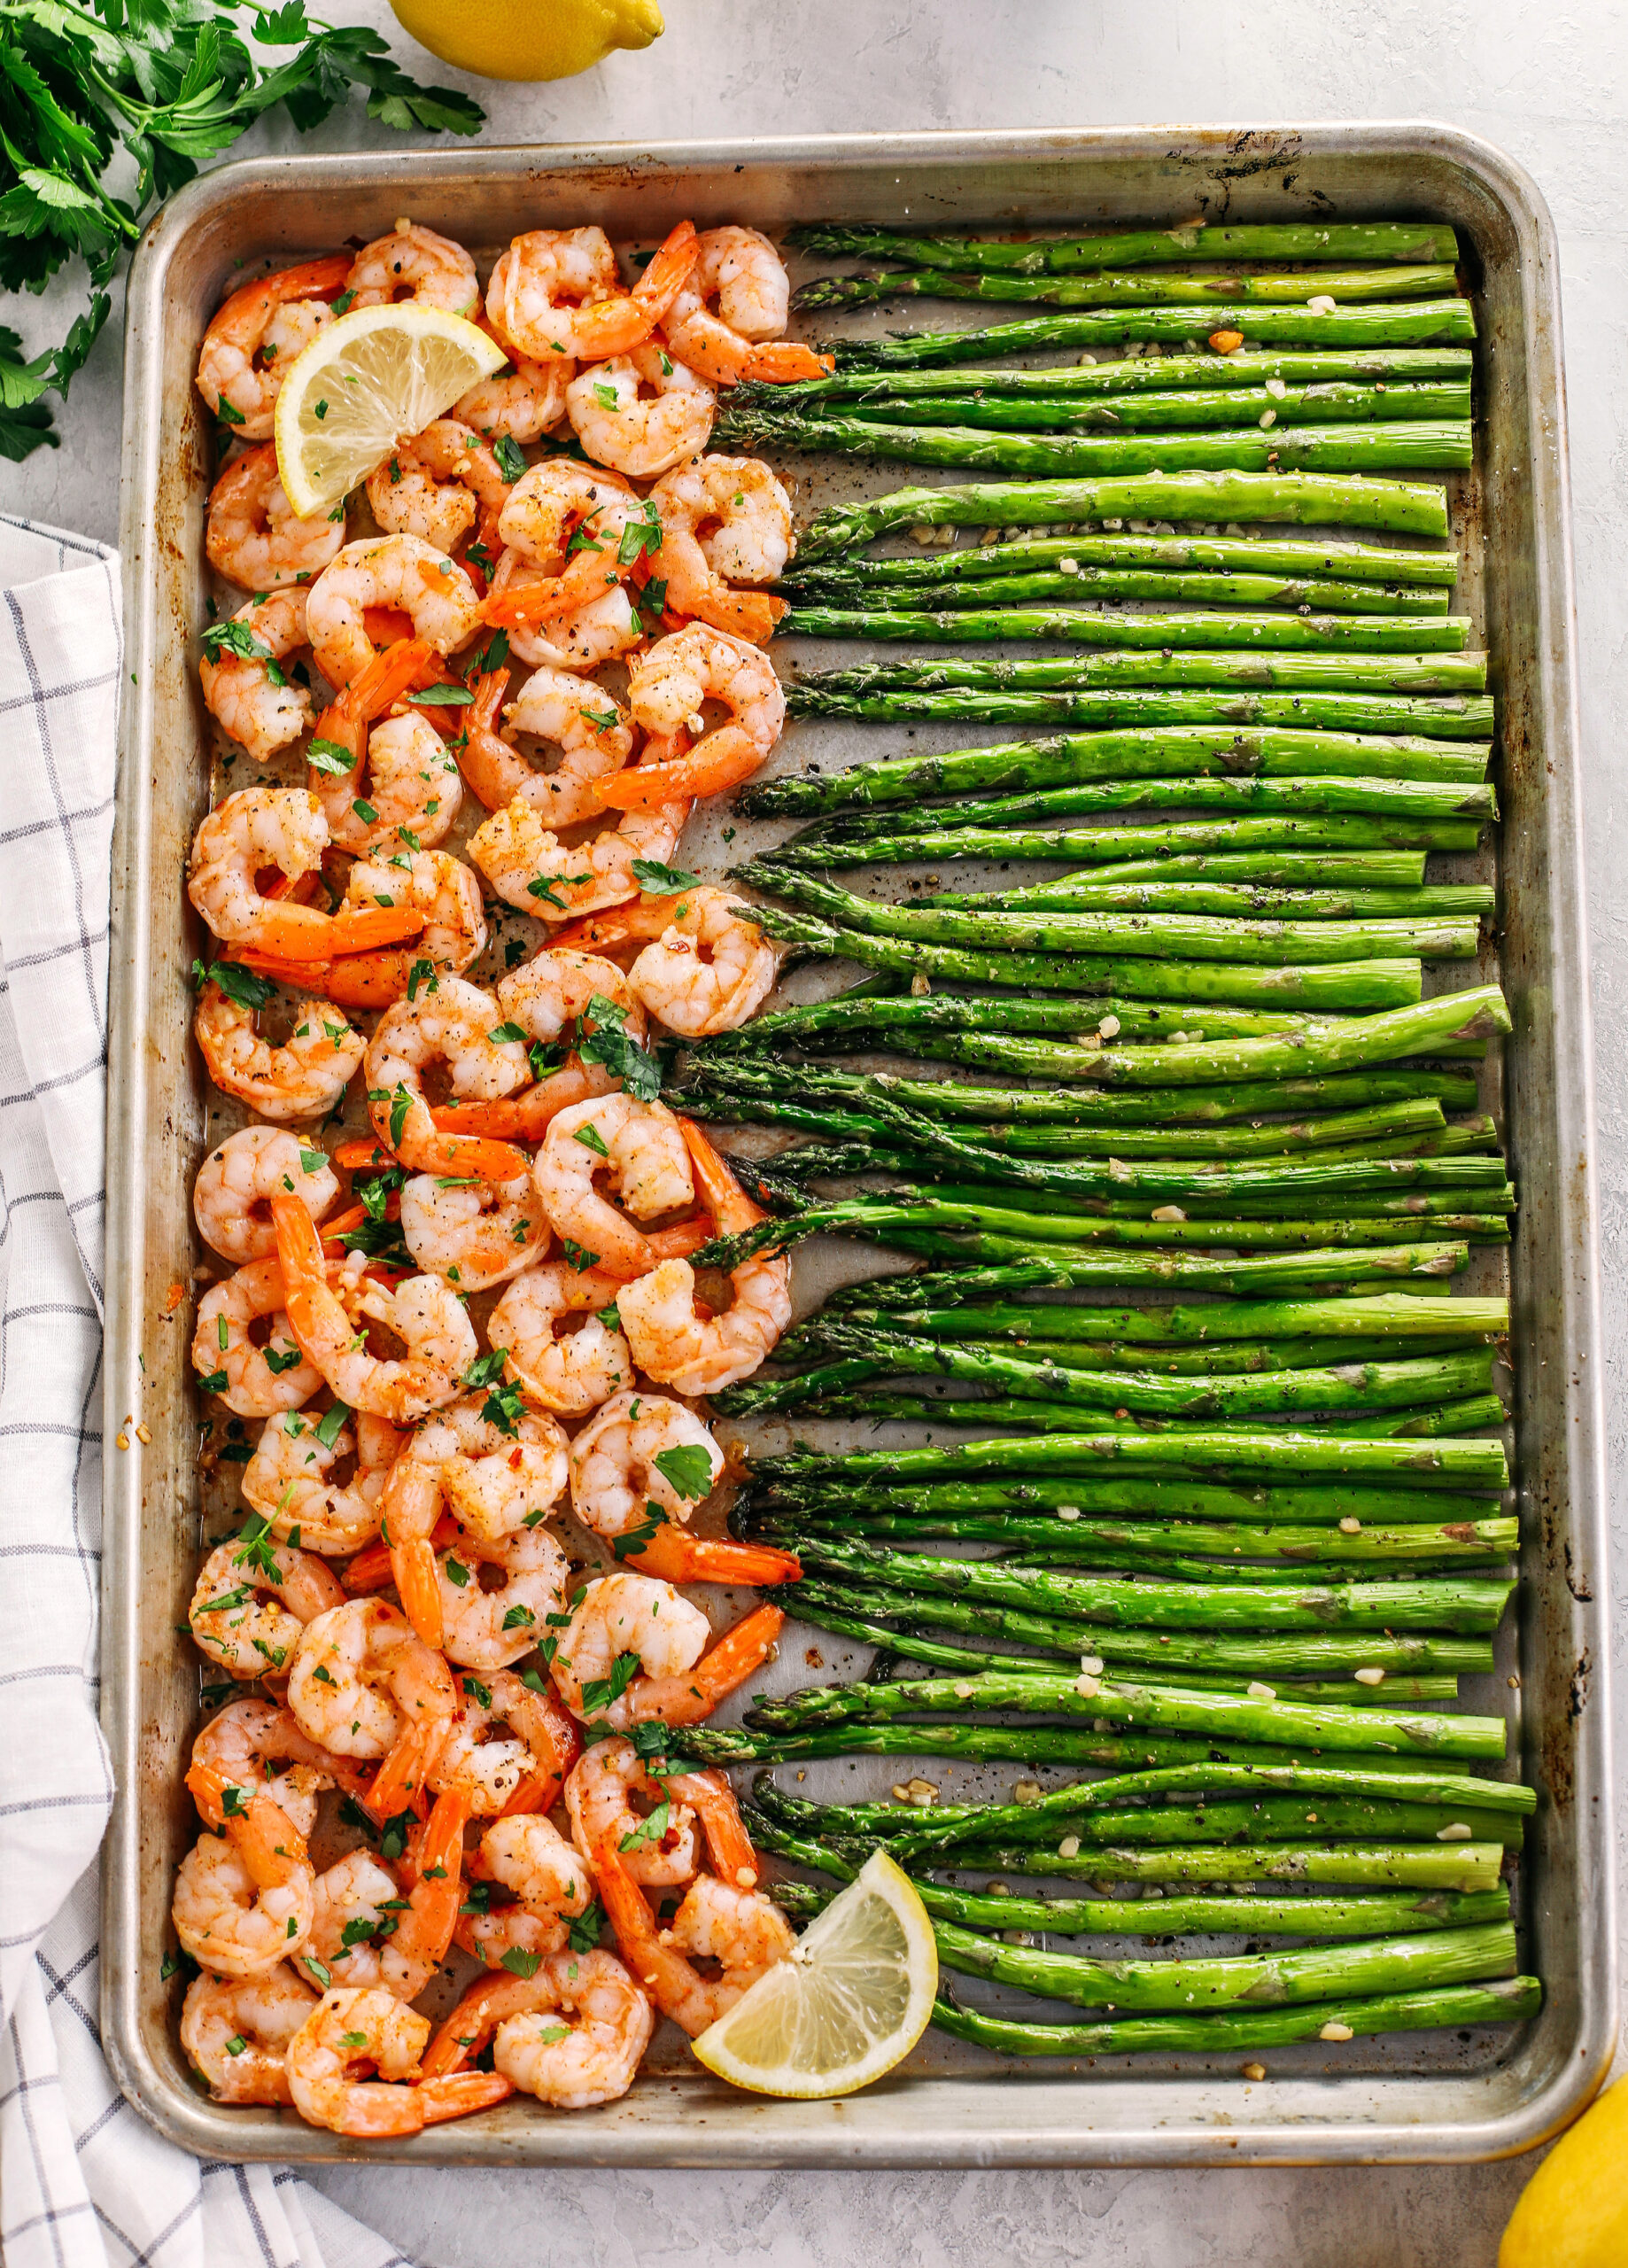 This Sheet Pan Lemon Garlic Shrimp and Asparagus is the perfect weeknight dinner loaded with flavor and easily made all in one pan in under 20 minutes!